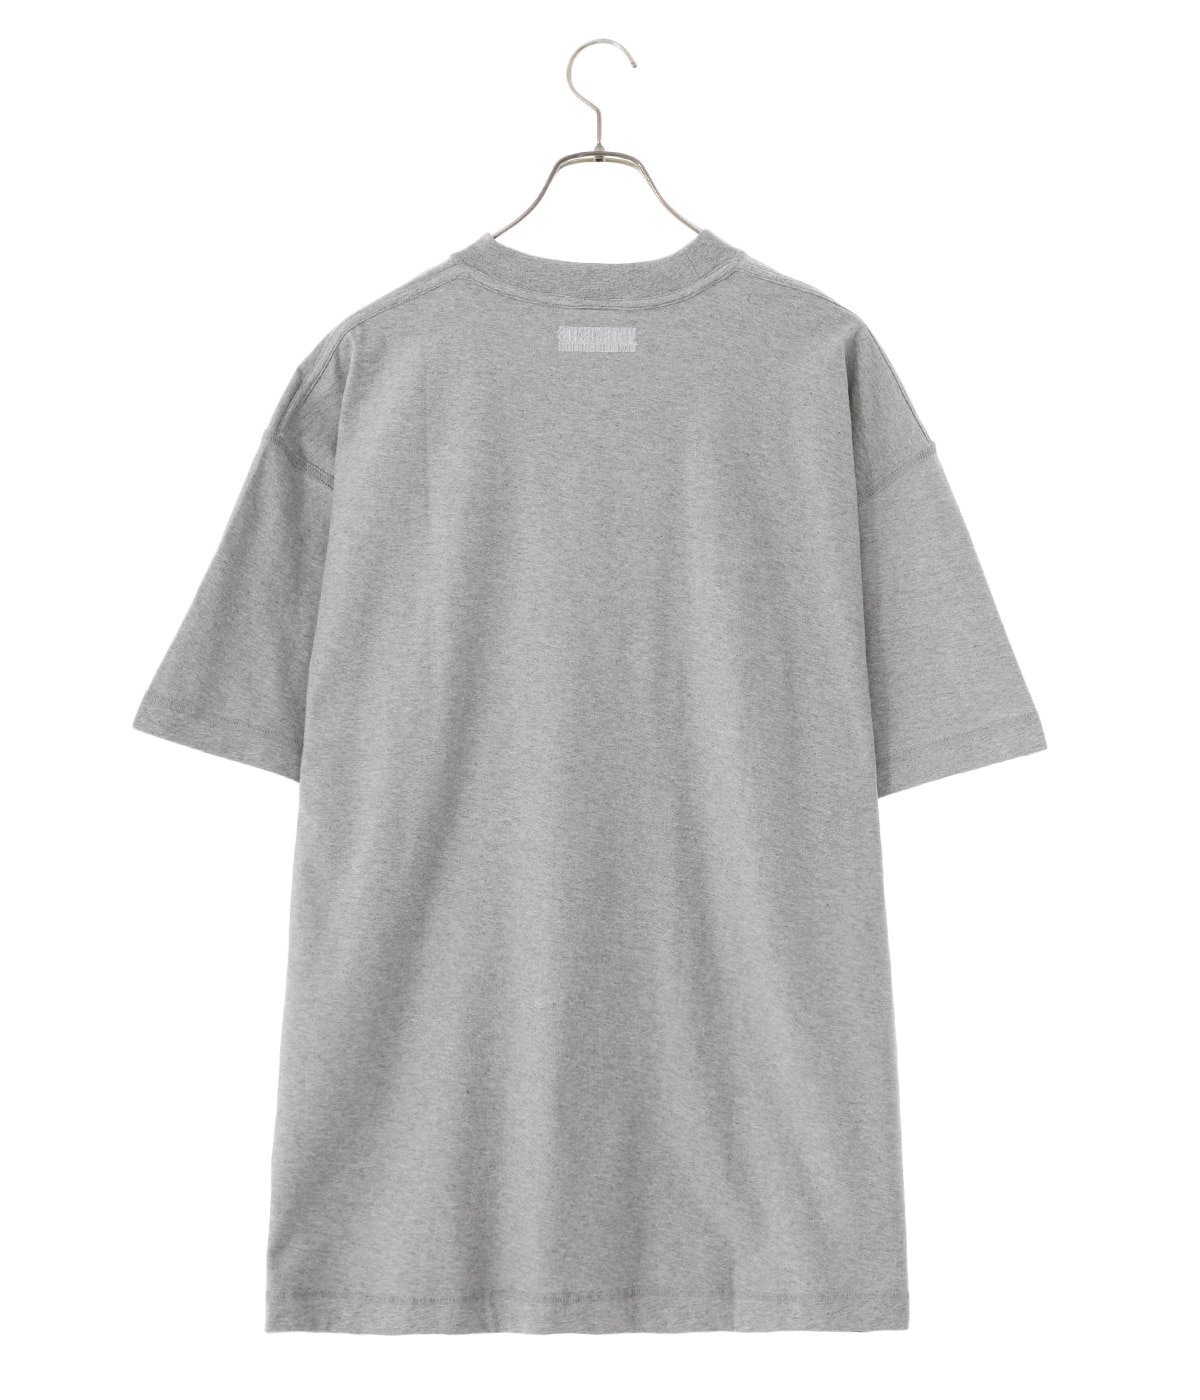 ALL GREY INSIDE-OUT T-SHIRT | VETEMENTS(ヴェトモン) / トップス 